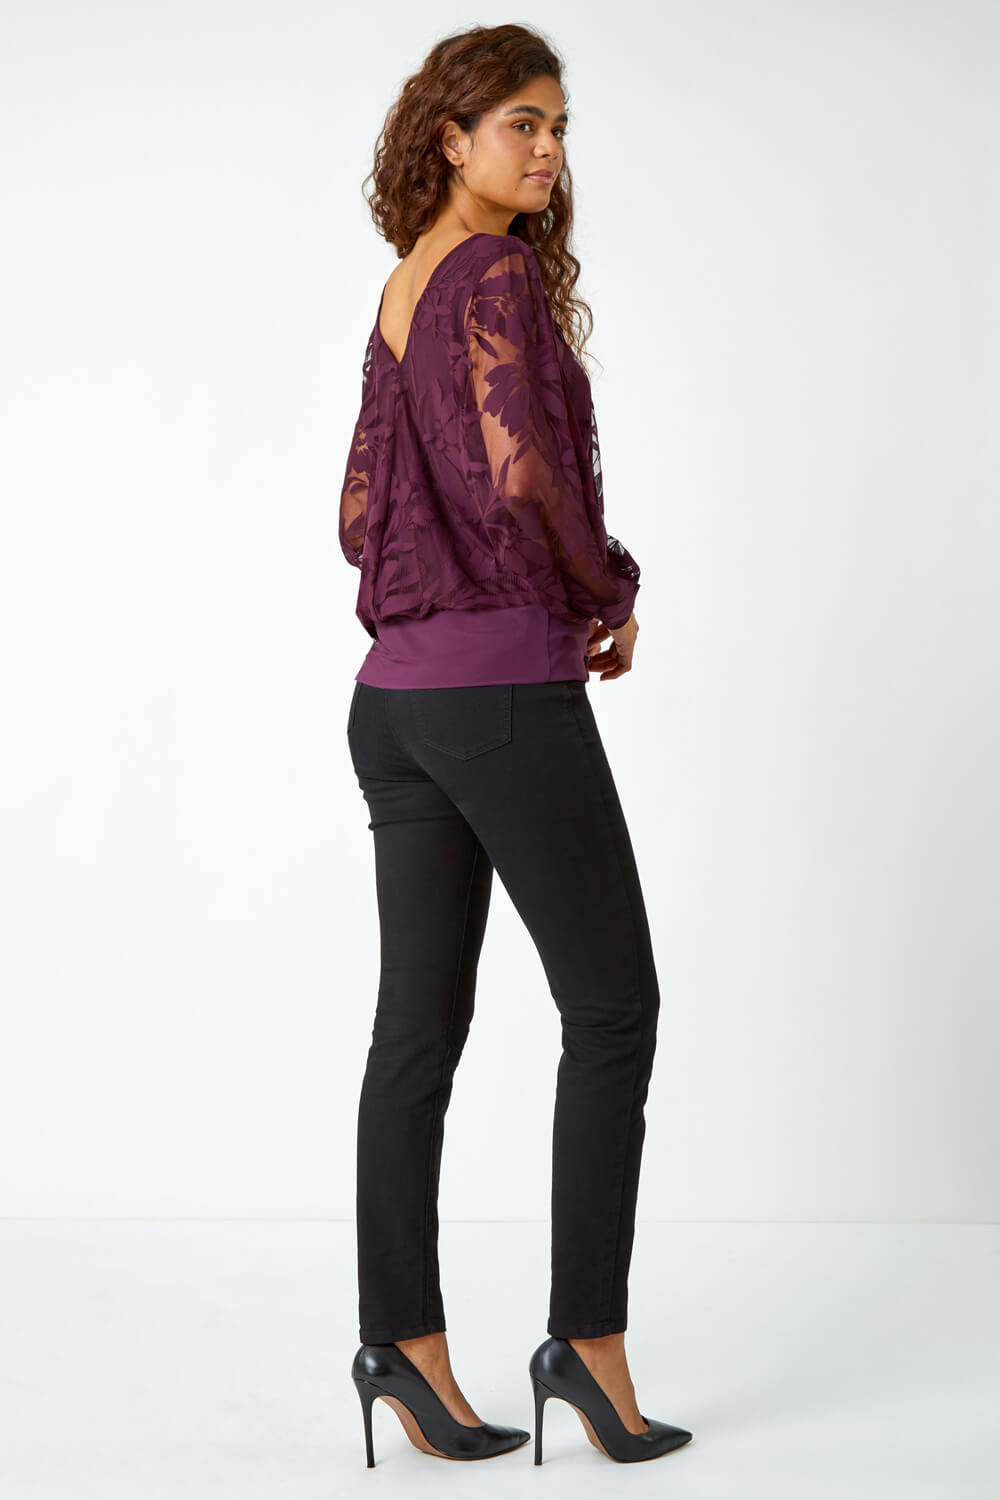 Plum Textured Floral Blouson Stretch Top, Image 3 of 5